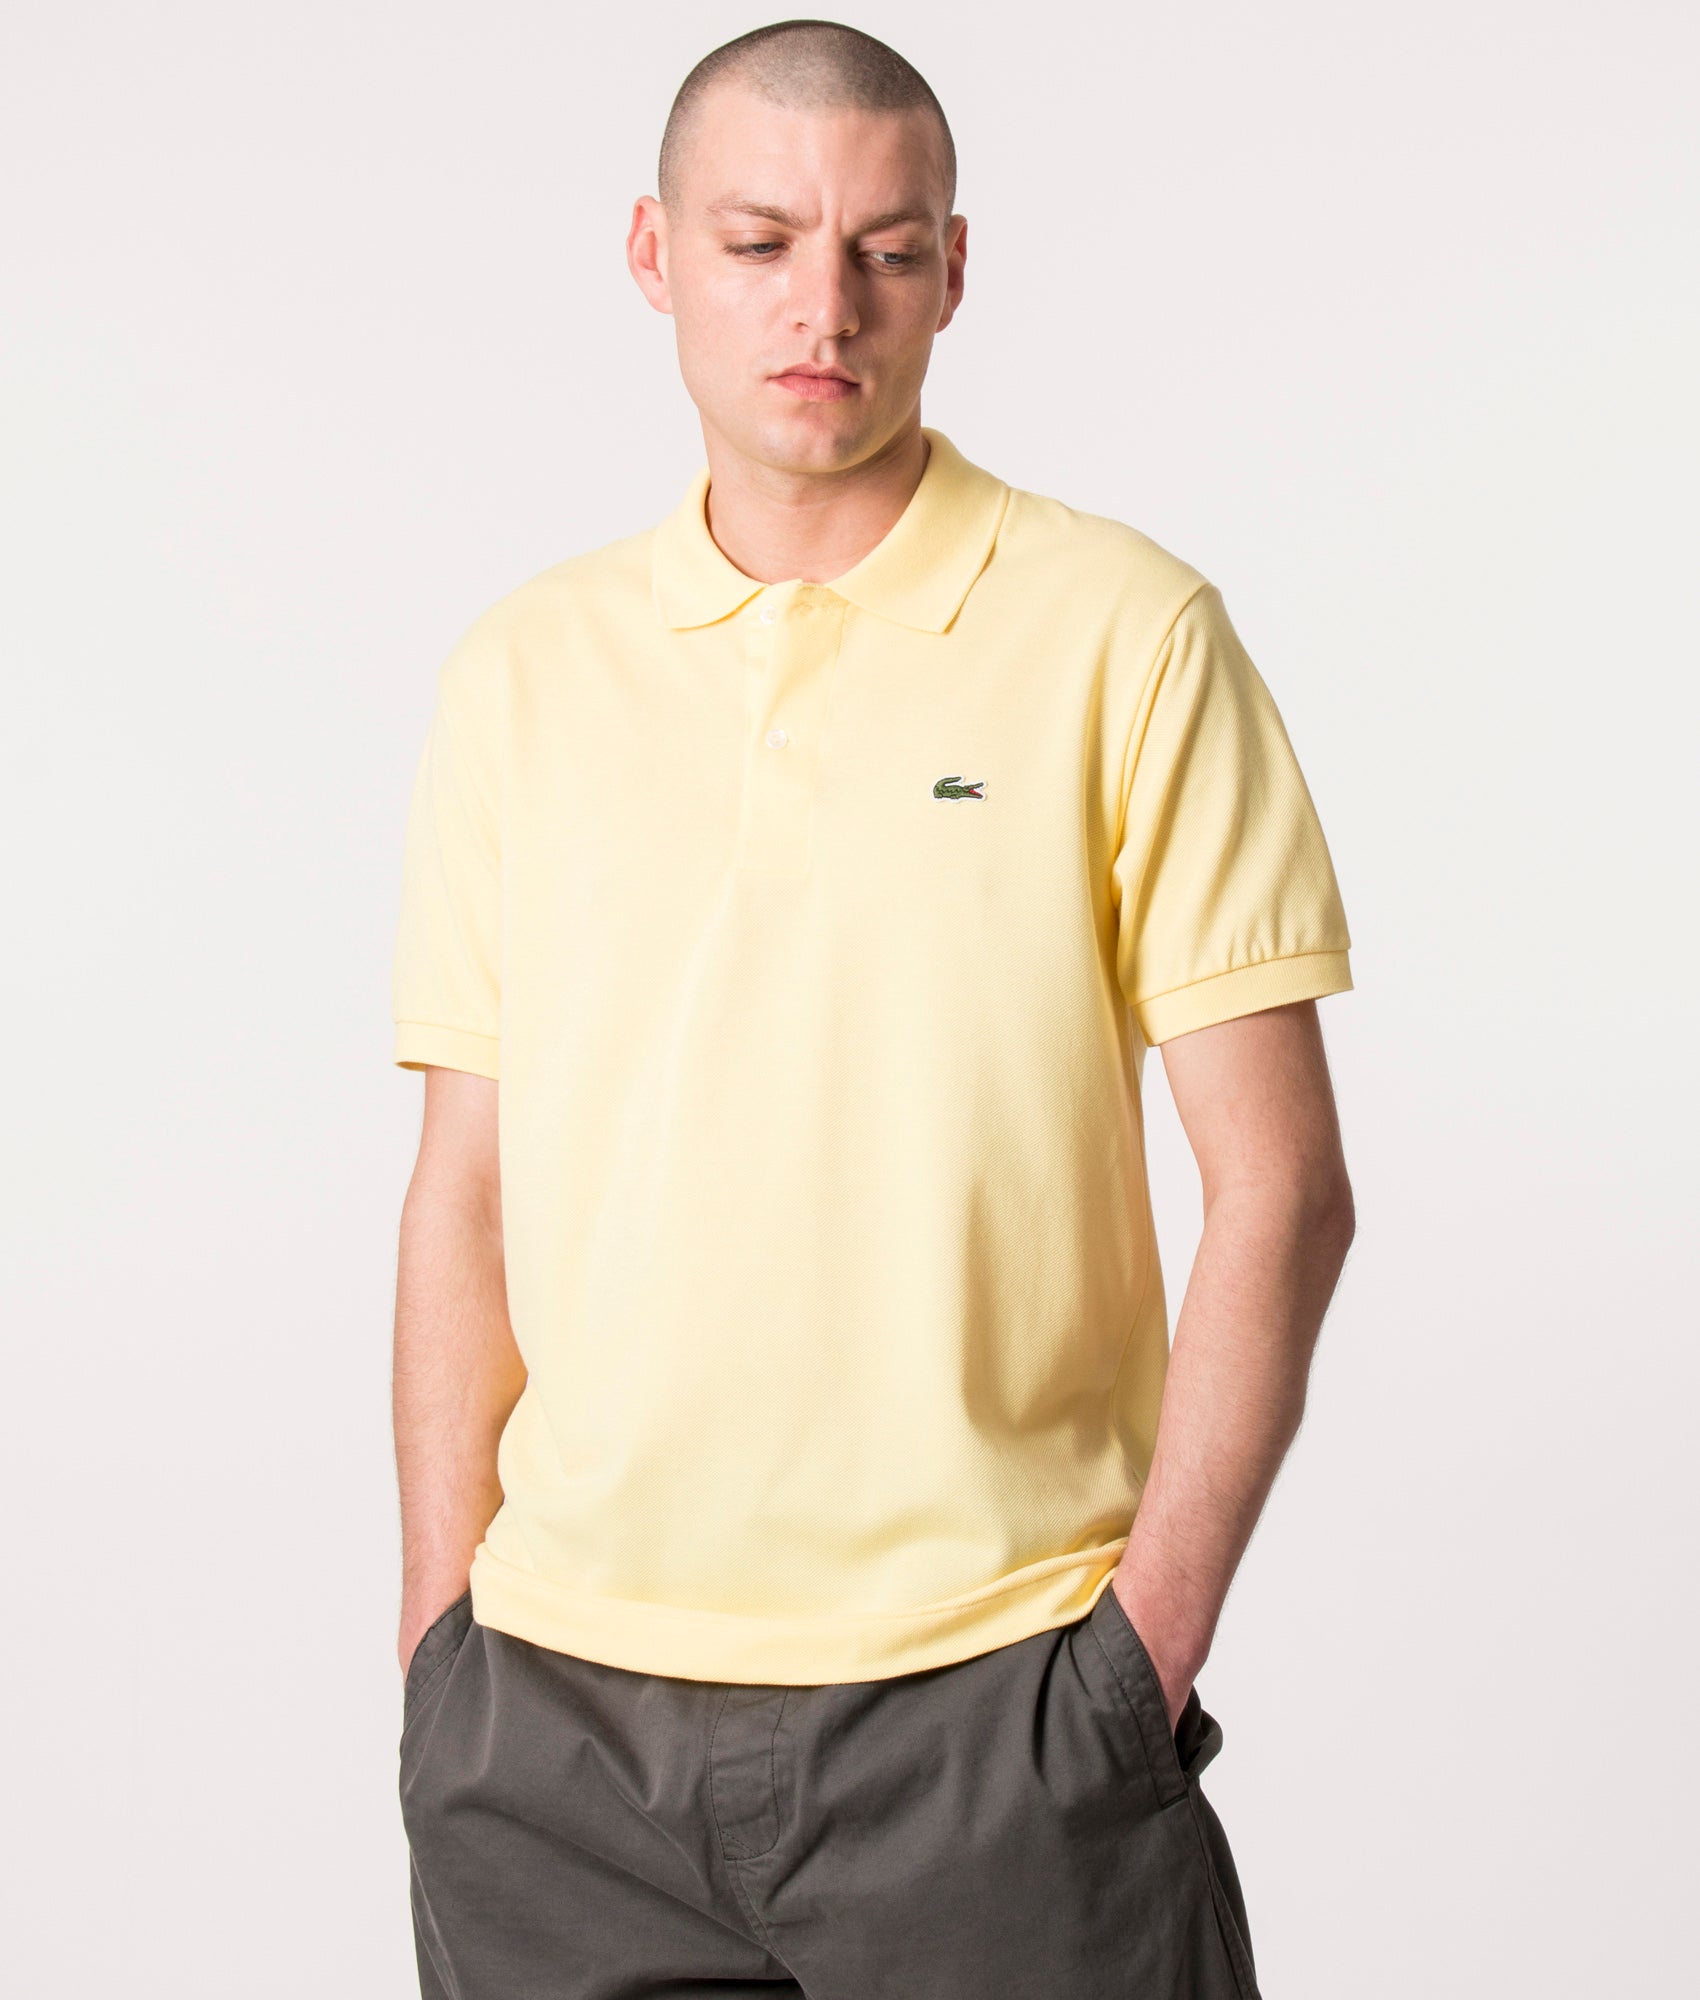 Relaxed Fit L1212 Croc Logo Shirt Yellow | Lacoste EQVVS